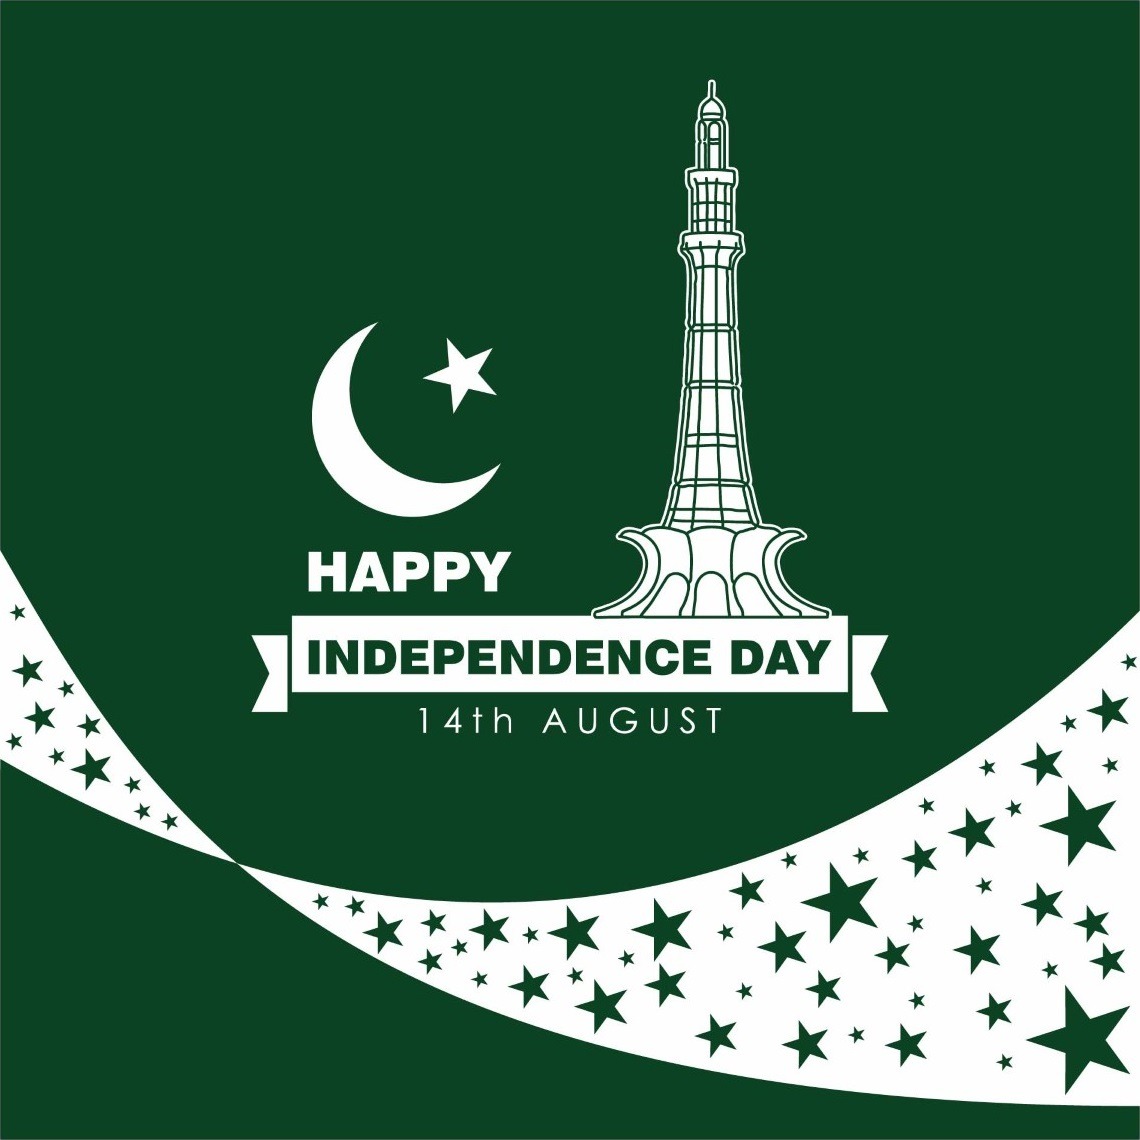 Happy Independence Day (14 August) 2021 Image Free Download